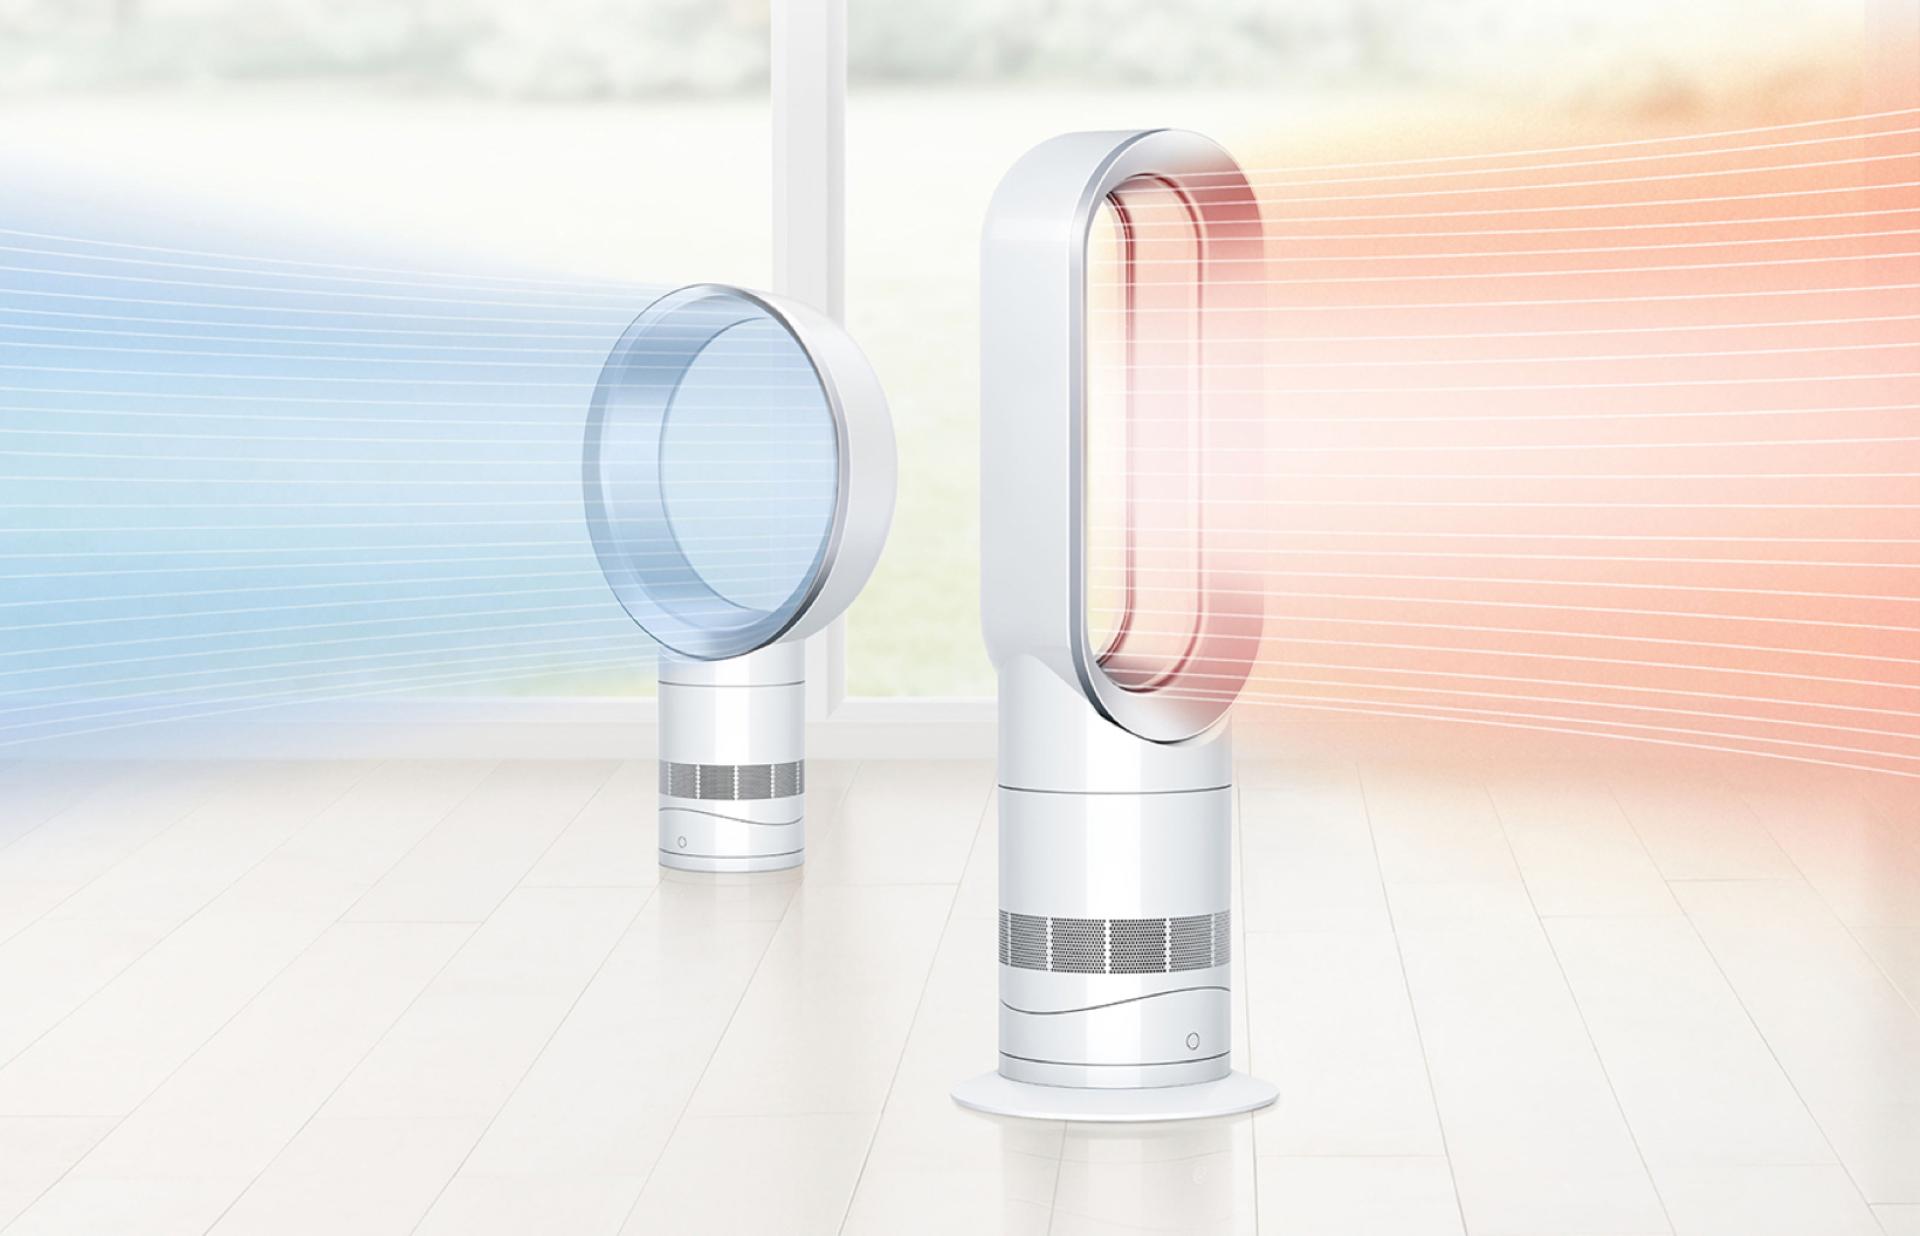 Dyson fans and heater